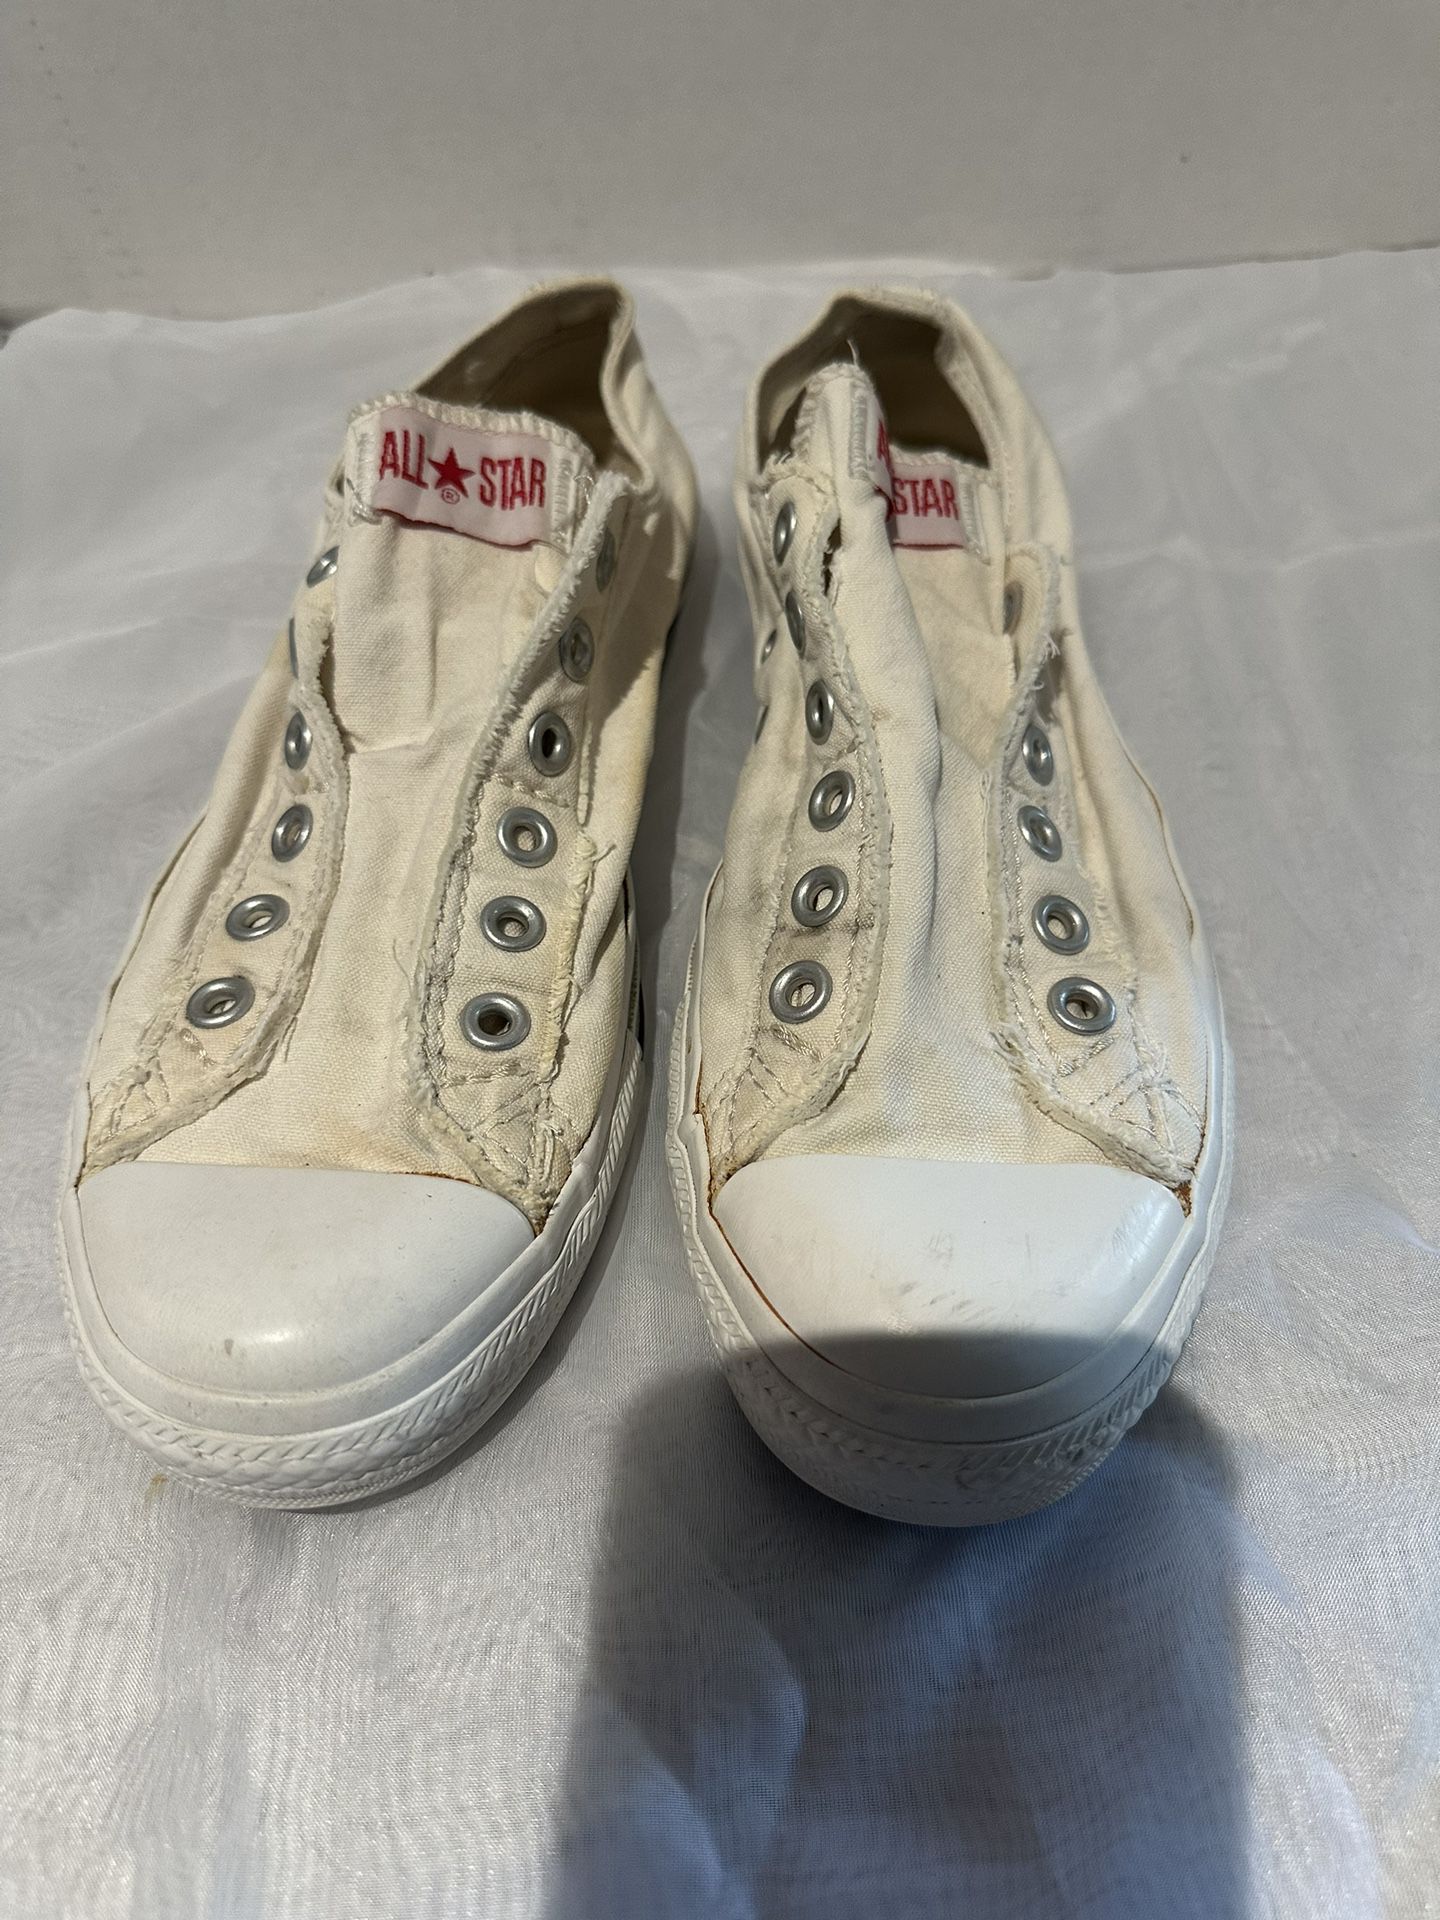 fisk samtale egyptisk Converse, All-Star, White Low Top No Laces Shoes By Chuck Taylor1T158, Rare  Find, Unisex for Sale in Tustin, CA - OfferUp